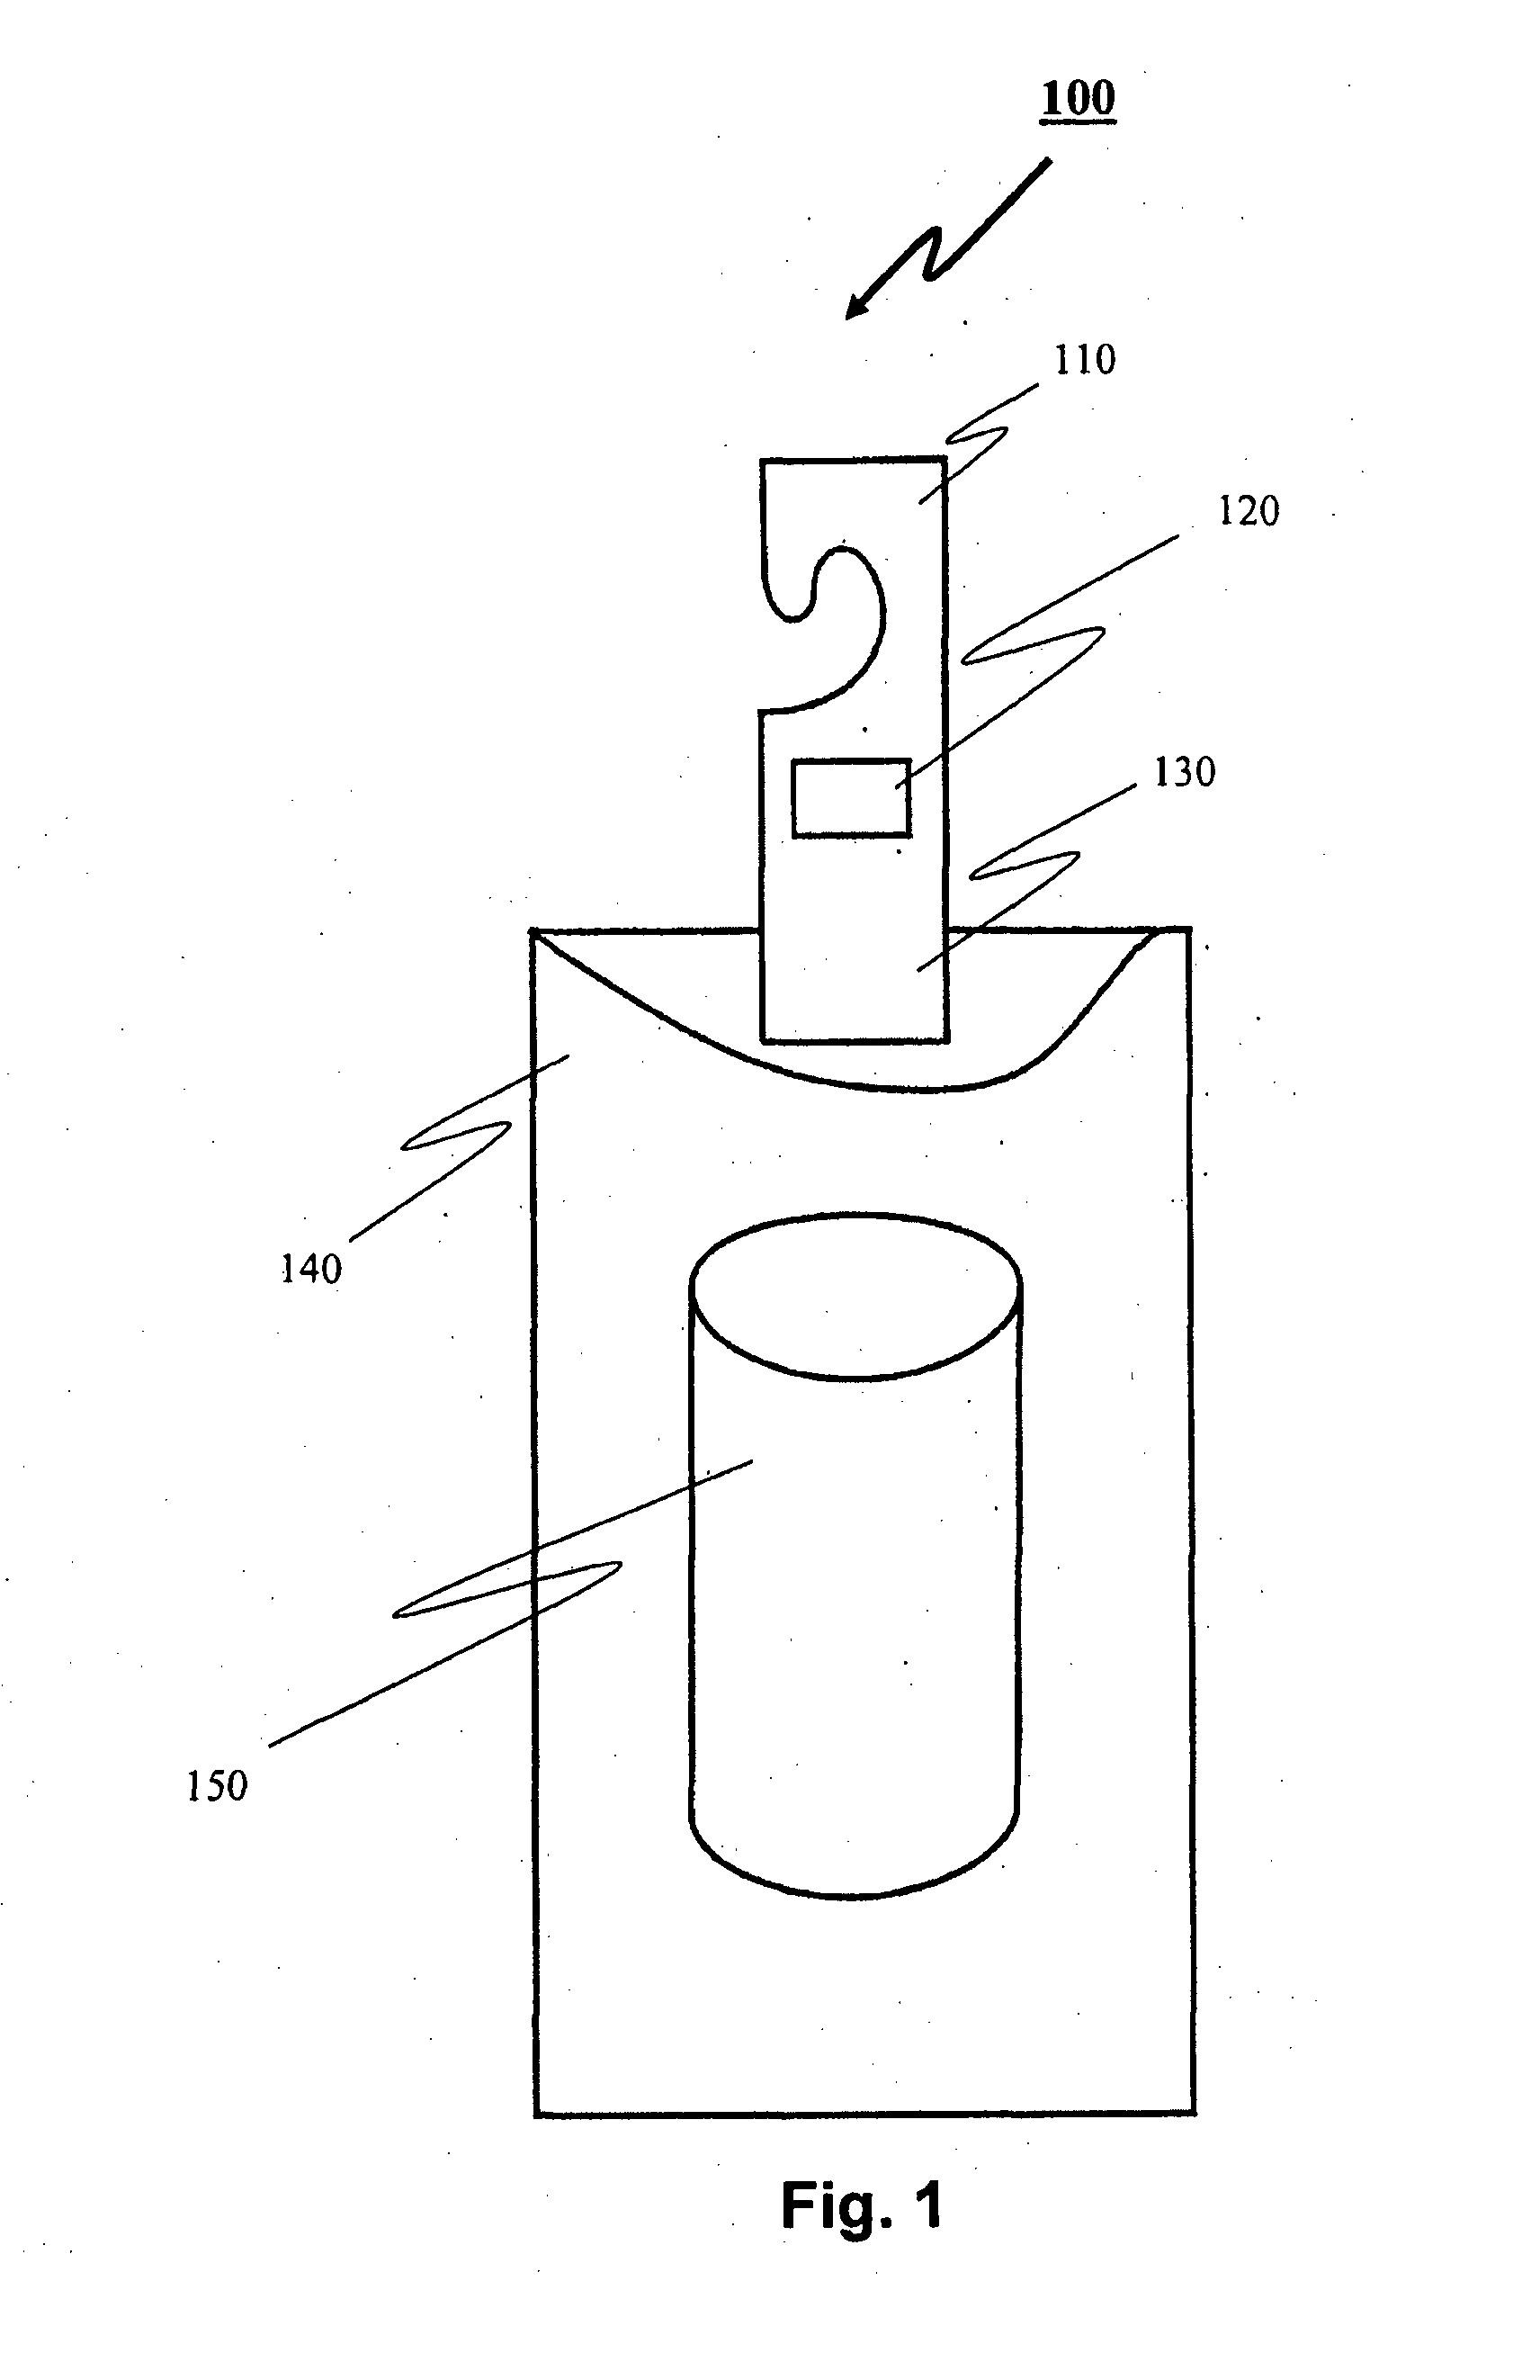 Method and apparatus for accurate and secure product dispensing